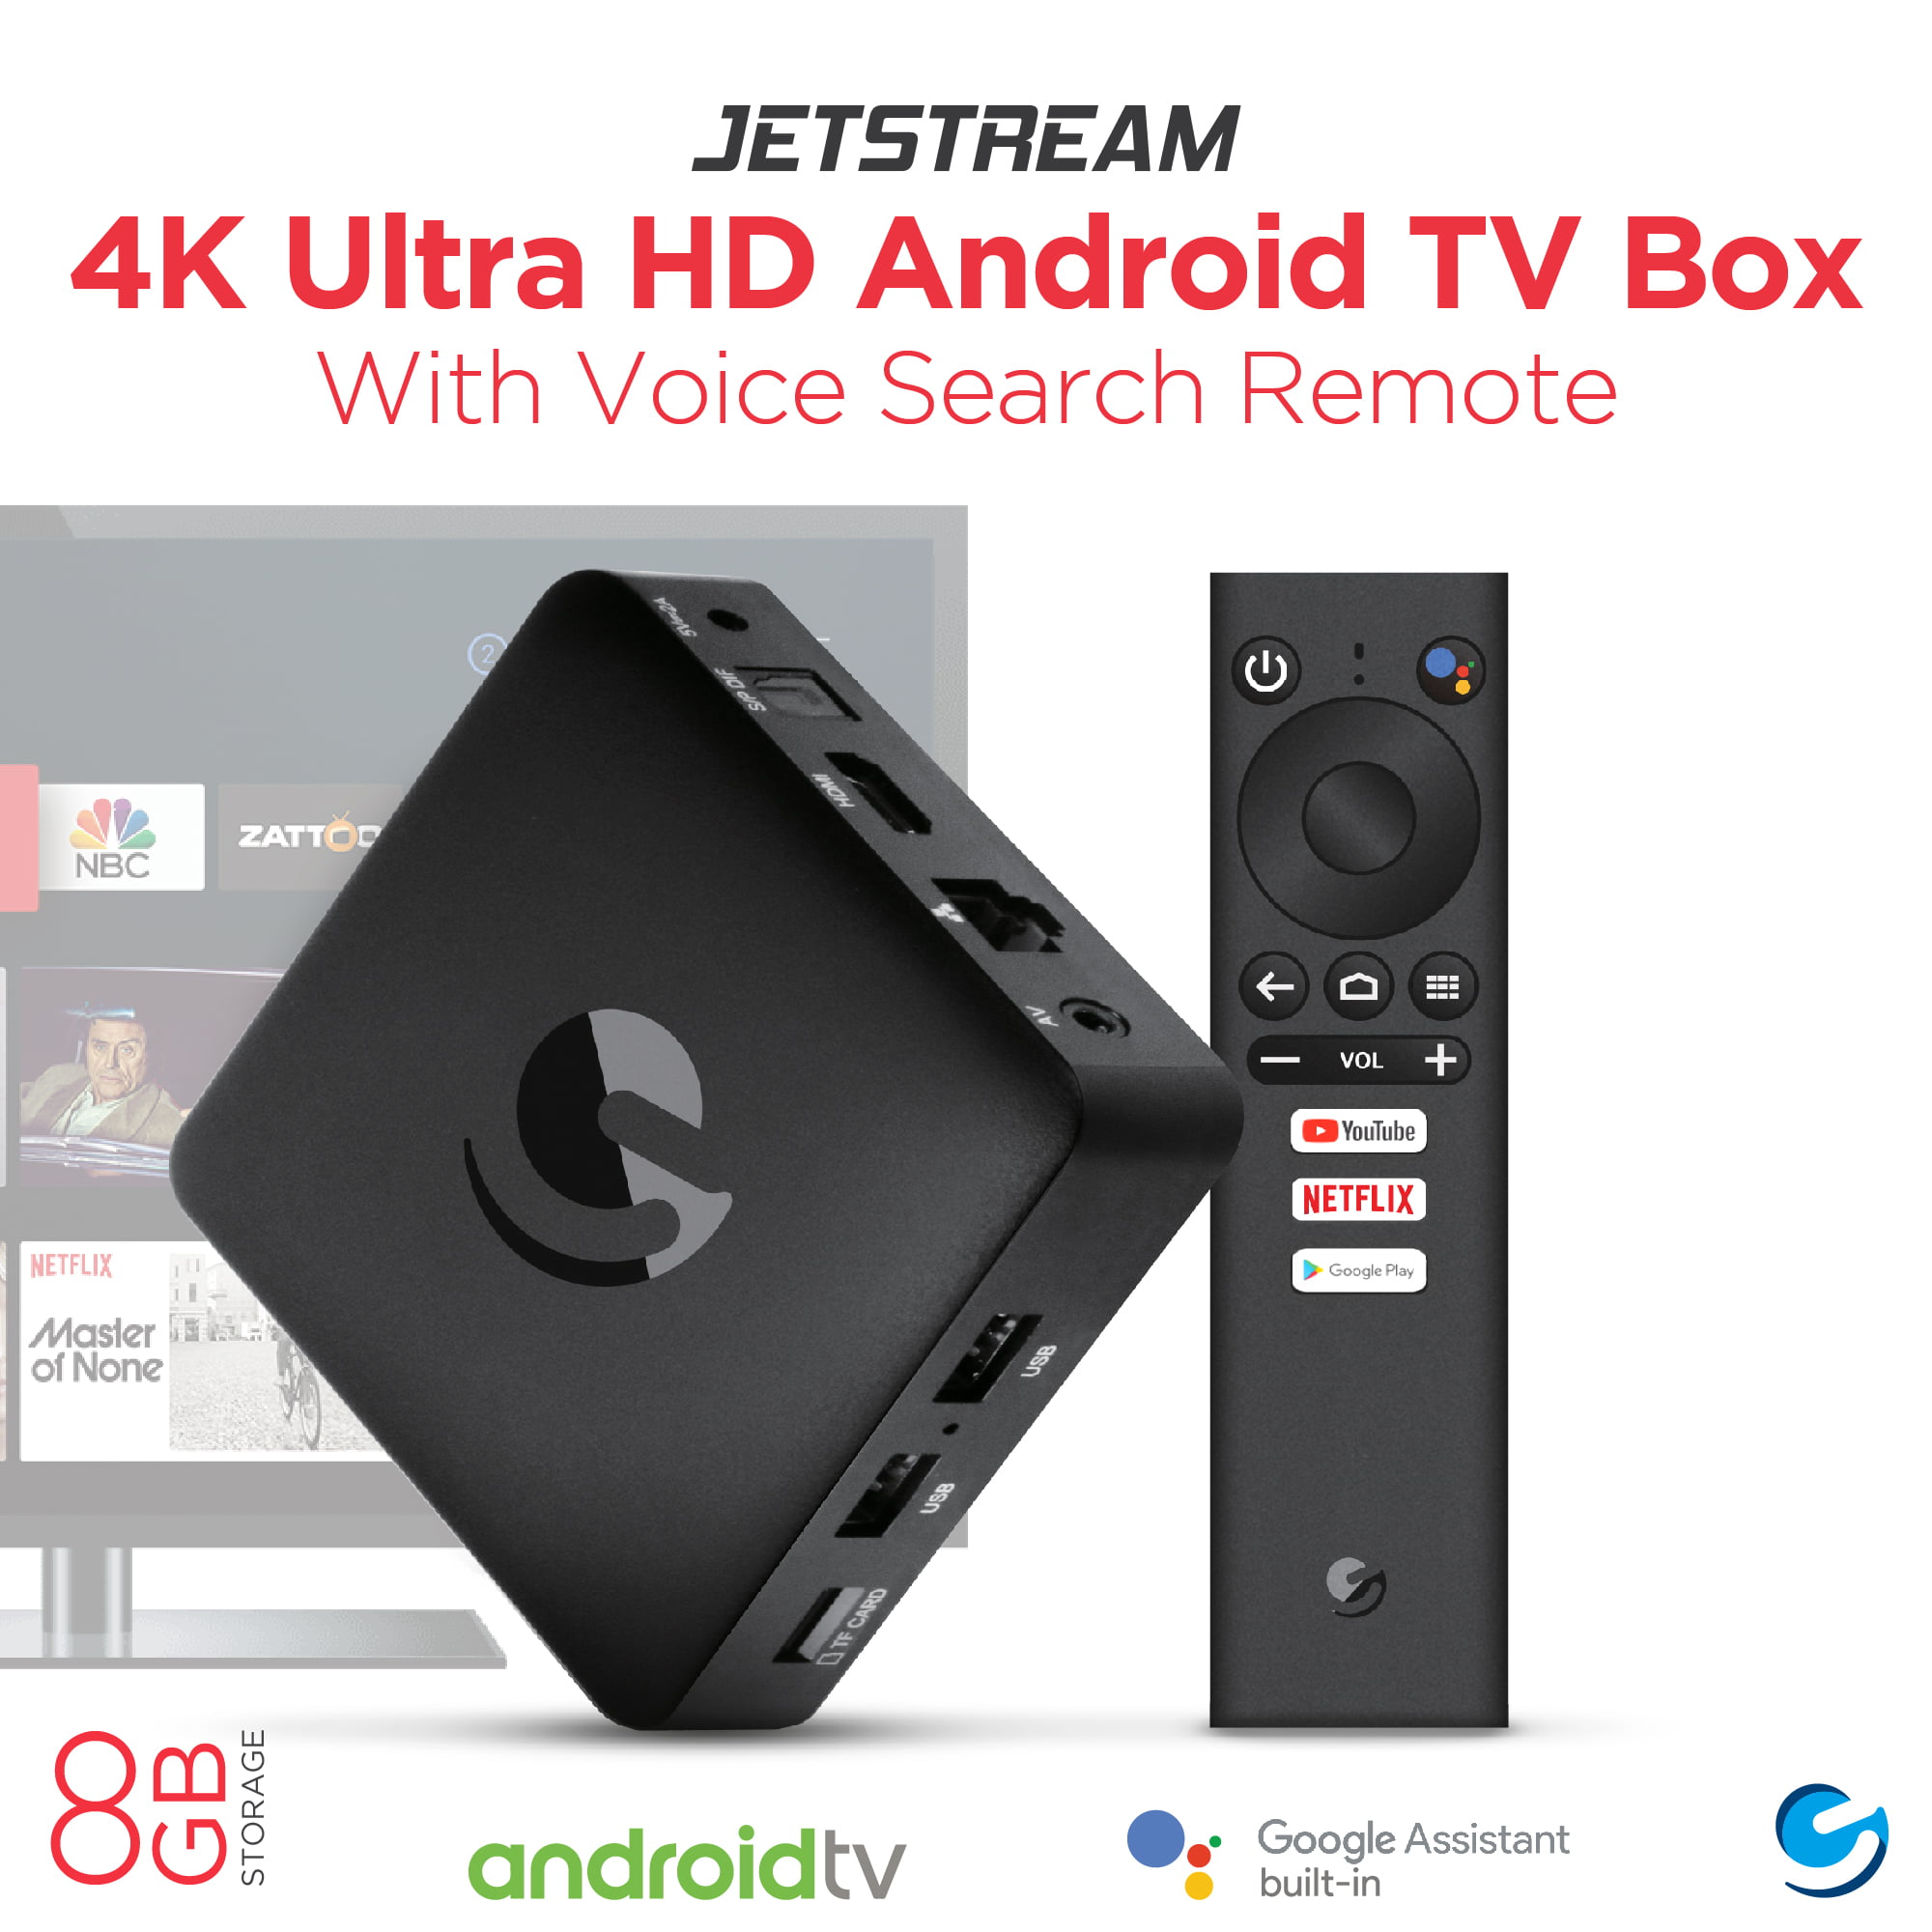 Ematic Jetstream 4K Ultra HD Android TV Box with Voice Search Remote  (AGT418) 